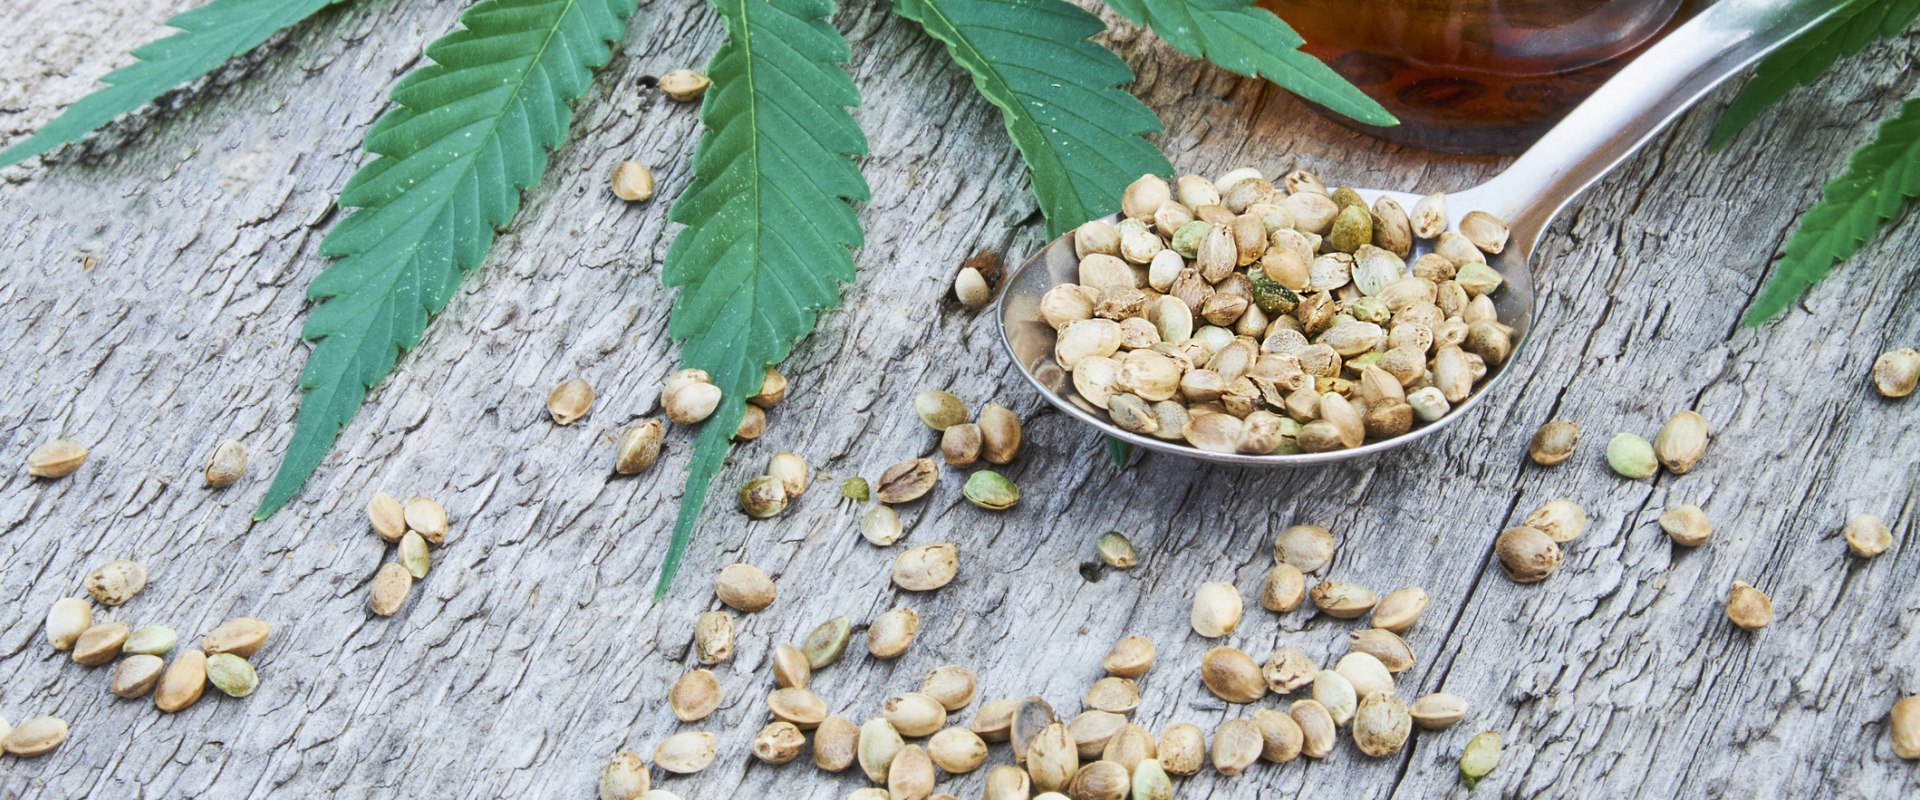 What does hemp do to the human body?